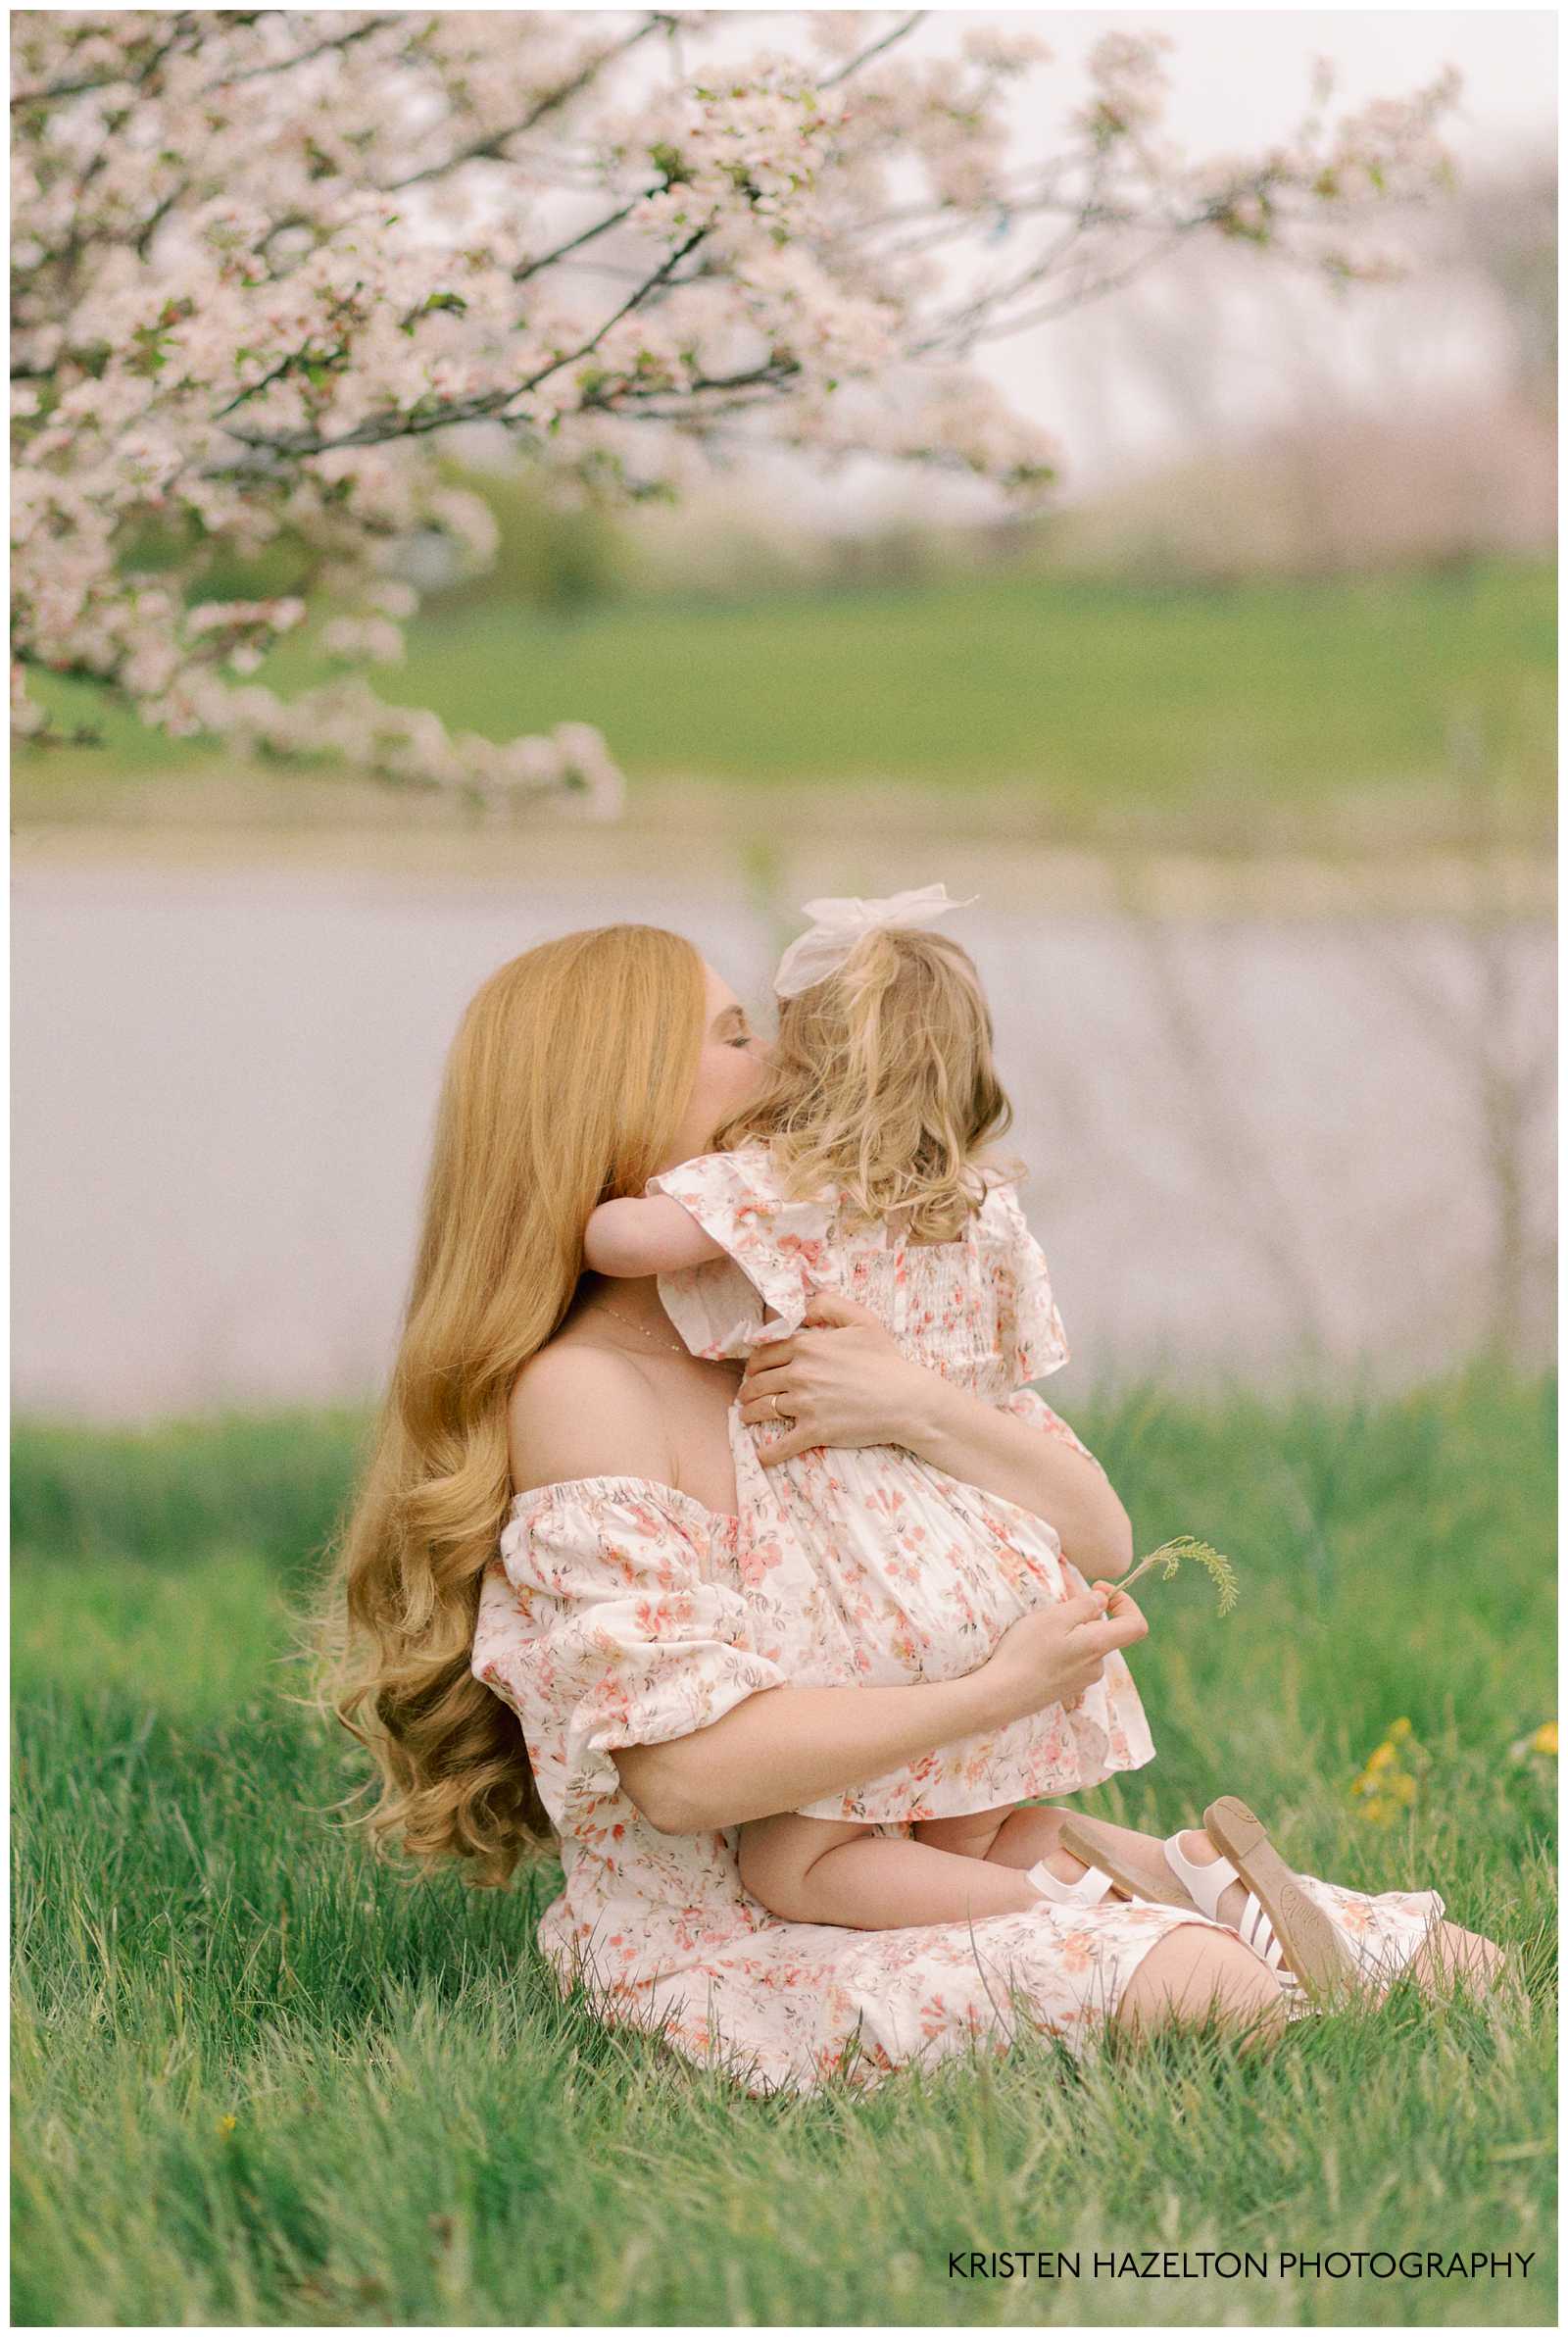 Mother hugging young daughter under a tree with white flowers. Both are wearing pink floral dresses for their St Patrick's Day in Chicago photoshoot